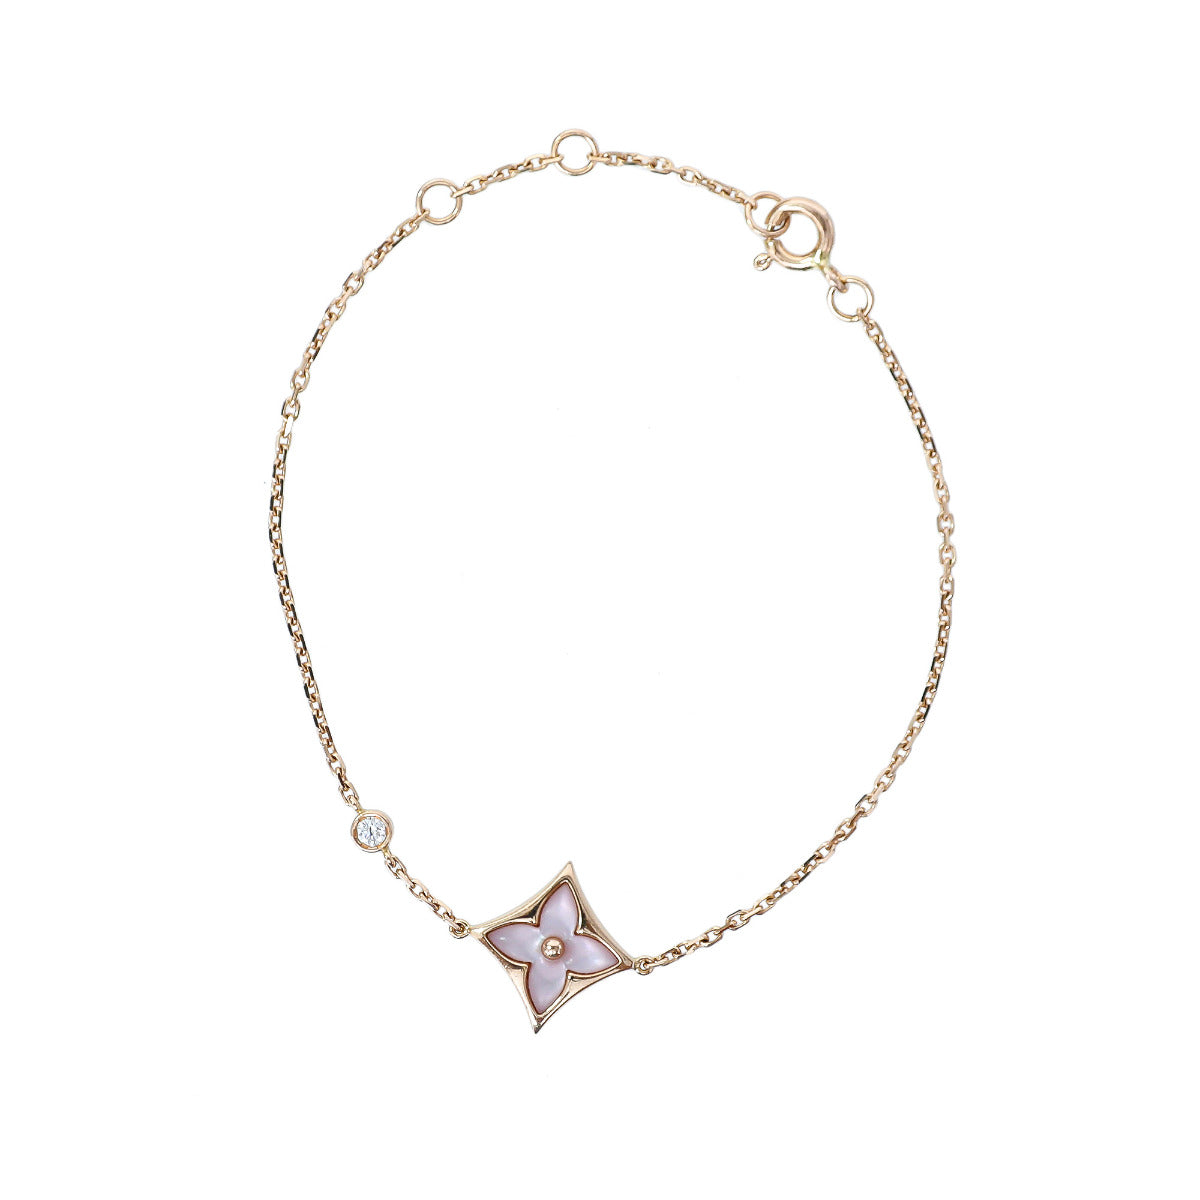 Louis Vuitton Color Blossom Star Bracelet Mother-of-Pearl Pink